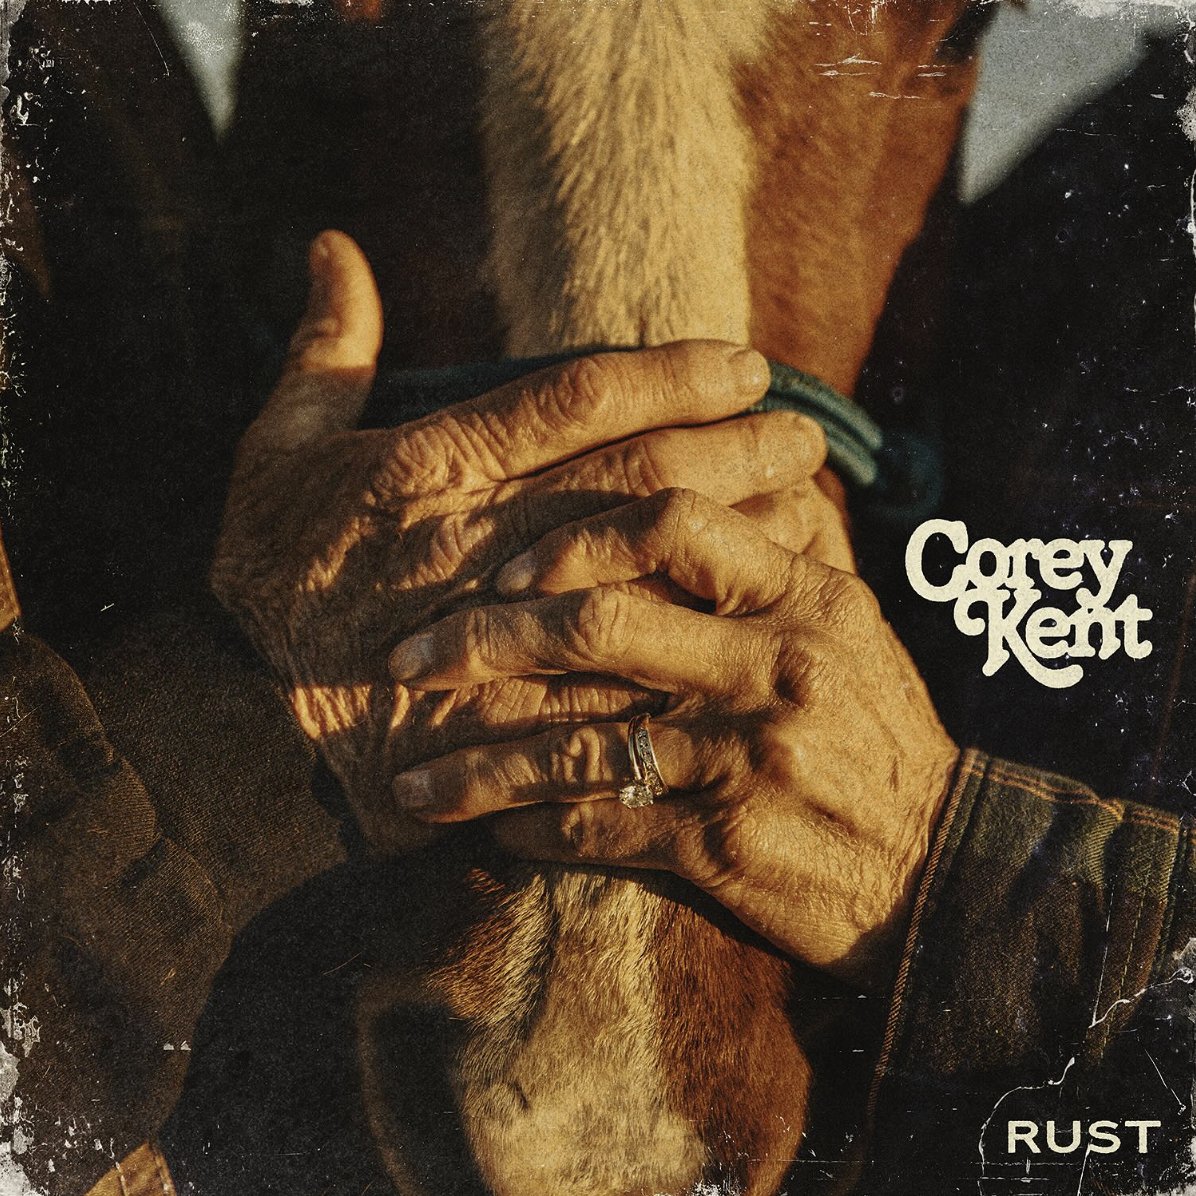 Corey Kent to release new song 'Rust' this Friday.